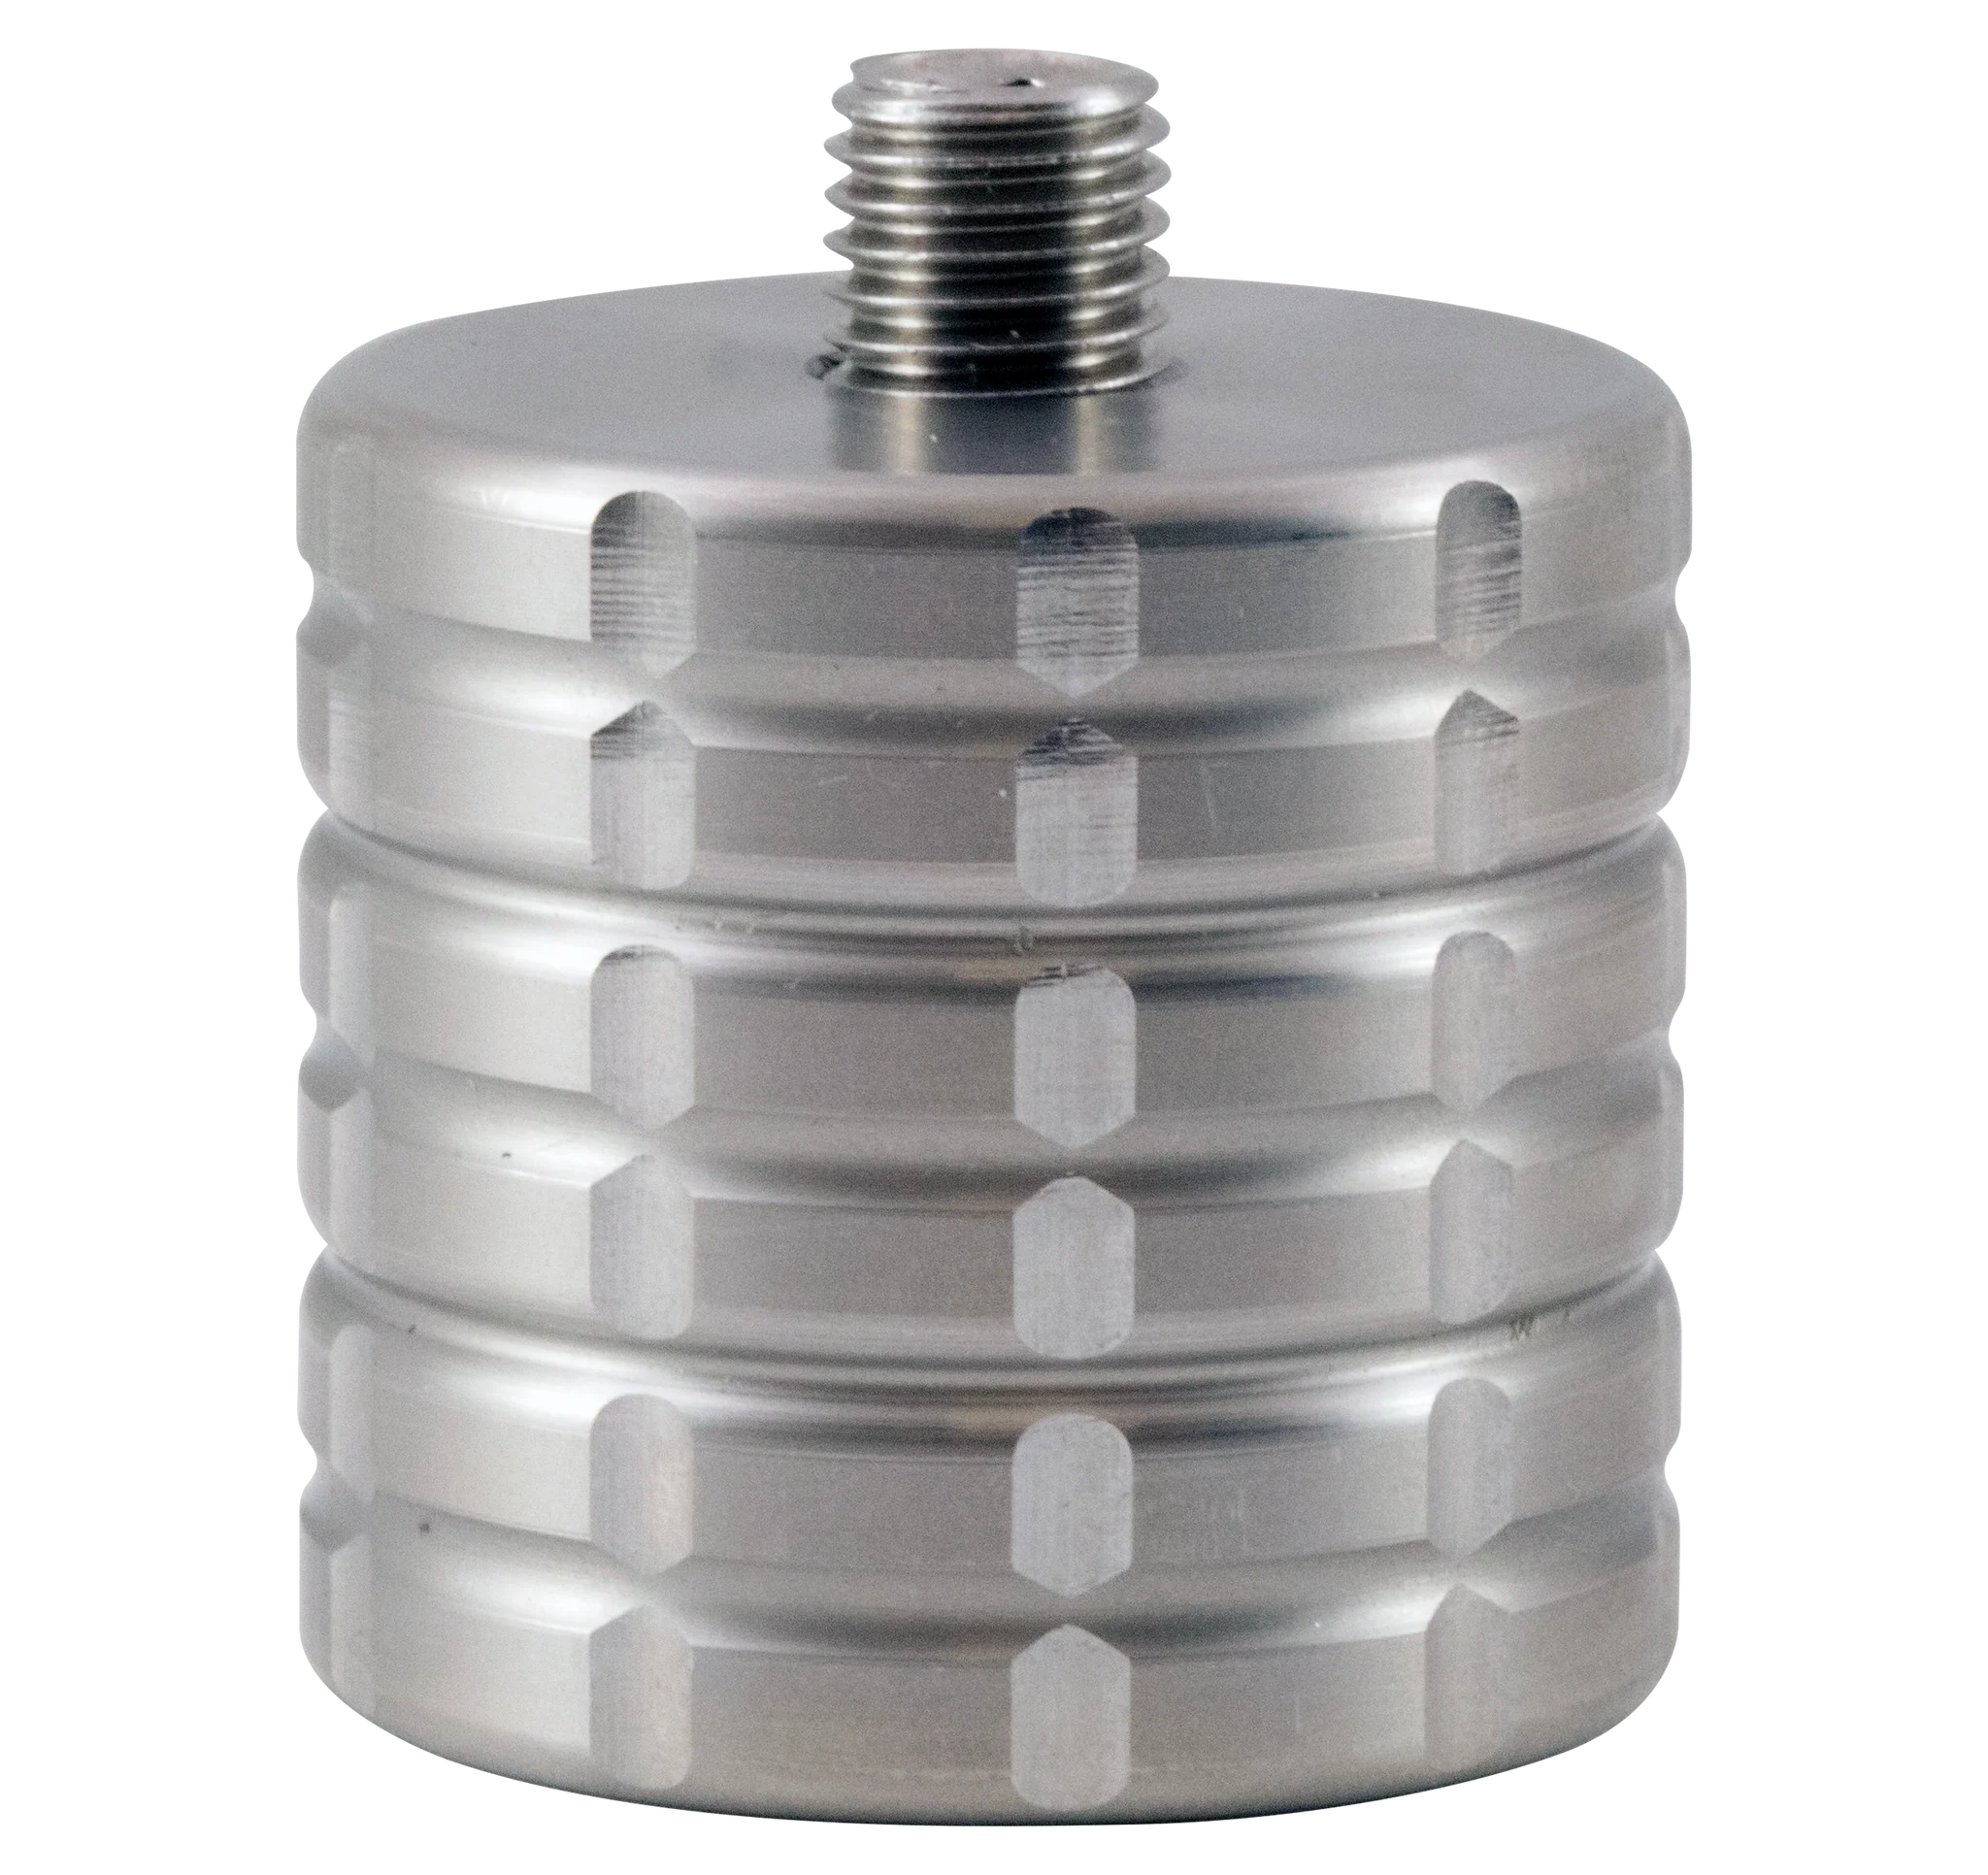 Axcel 1.25" Stainless Steel Weight (6 oz)